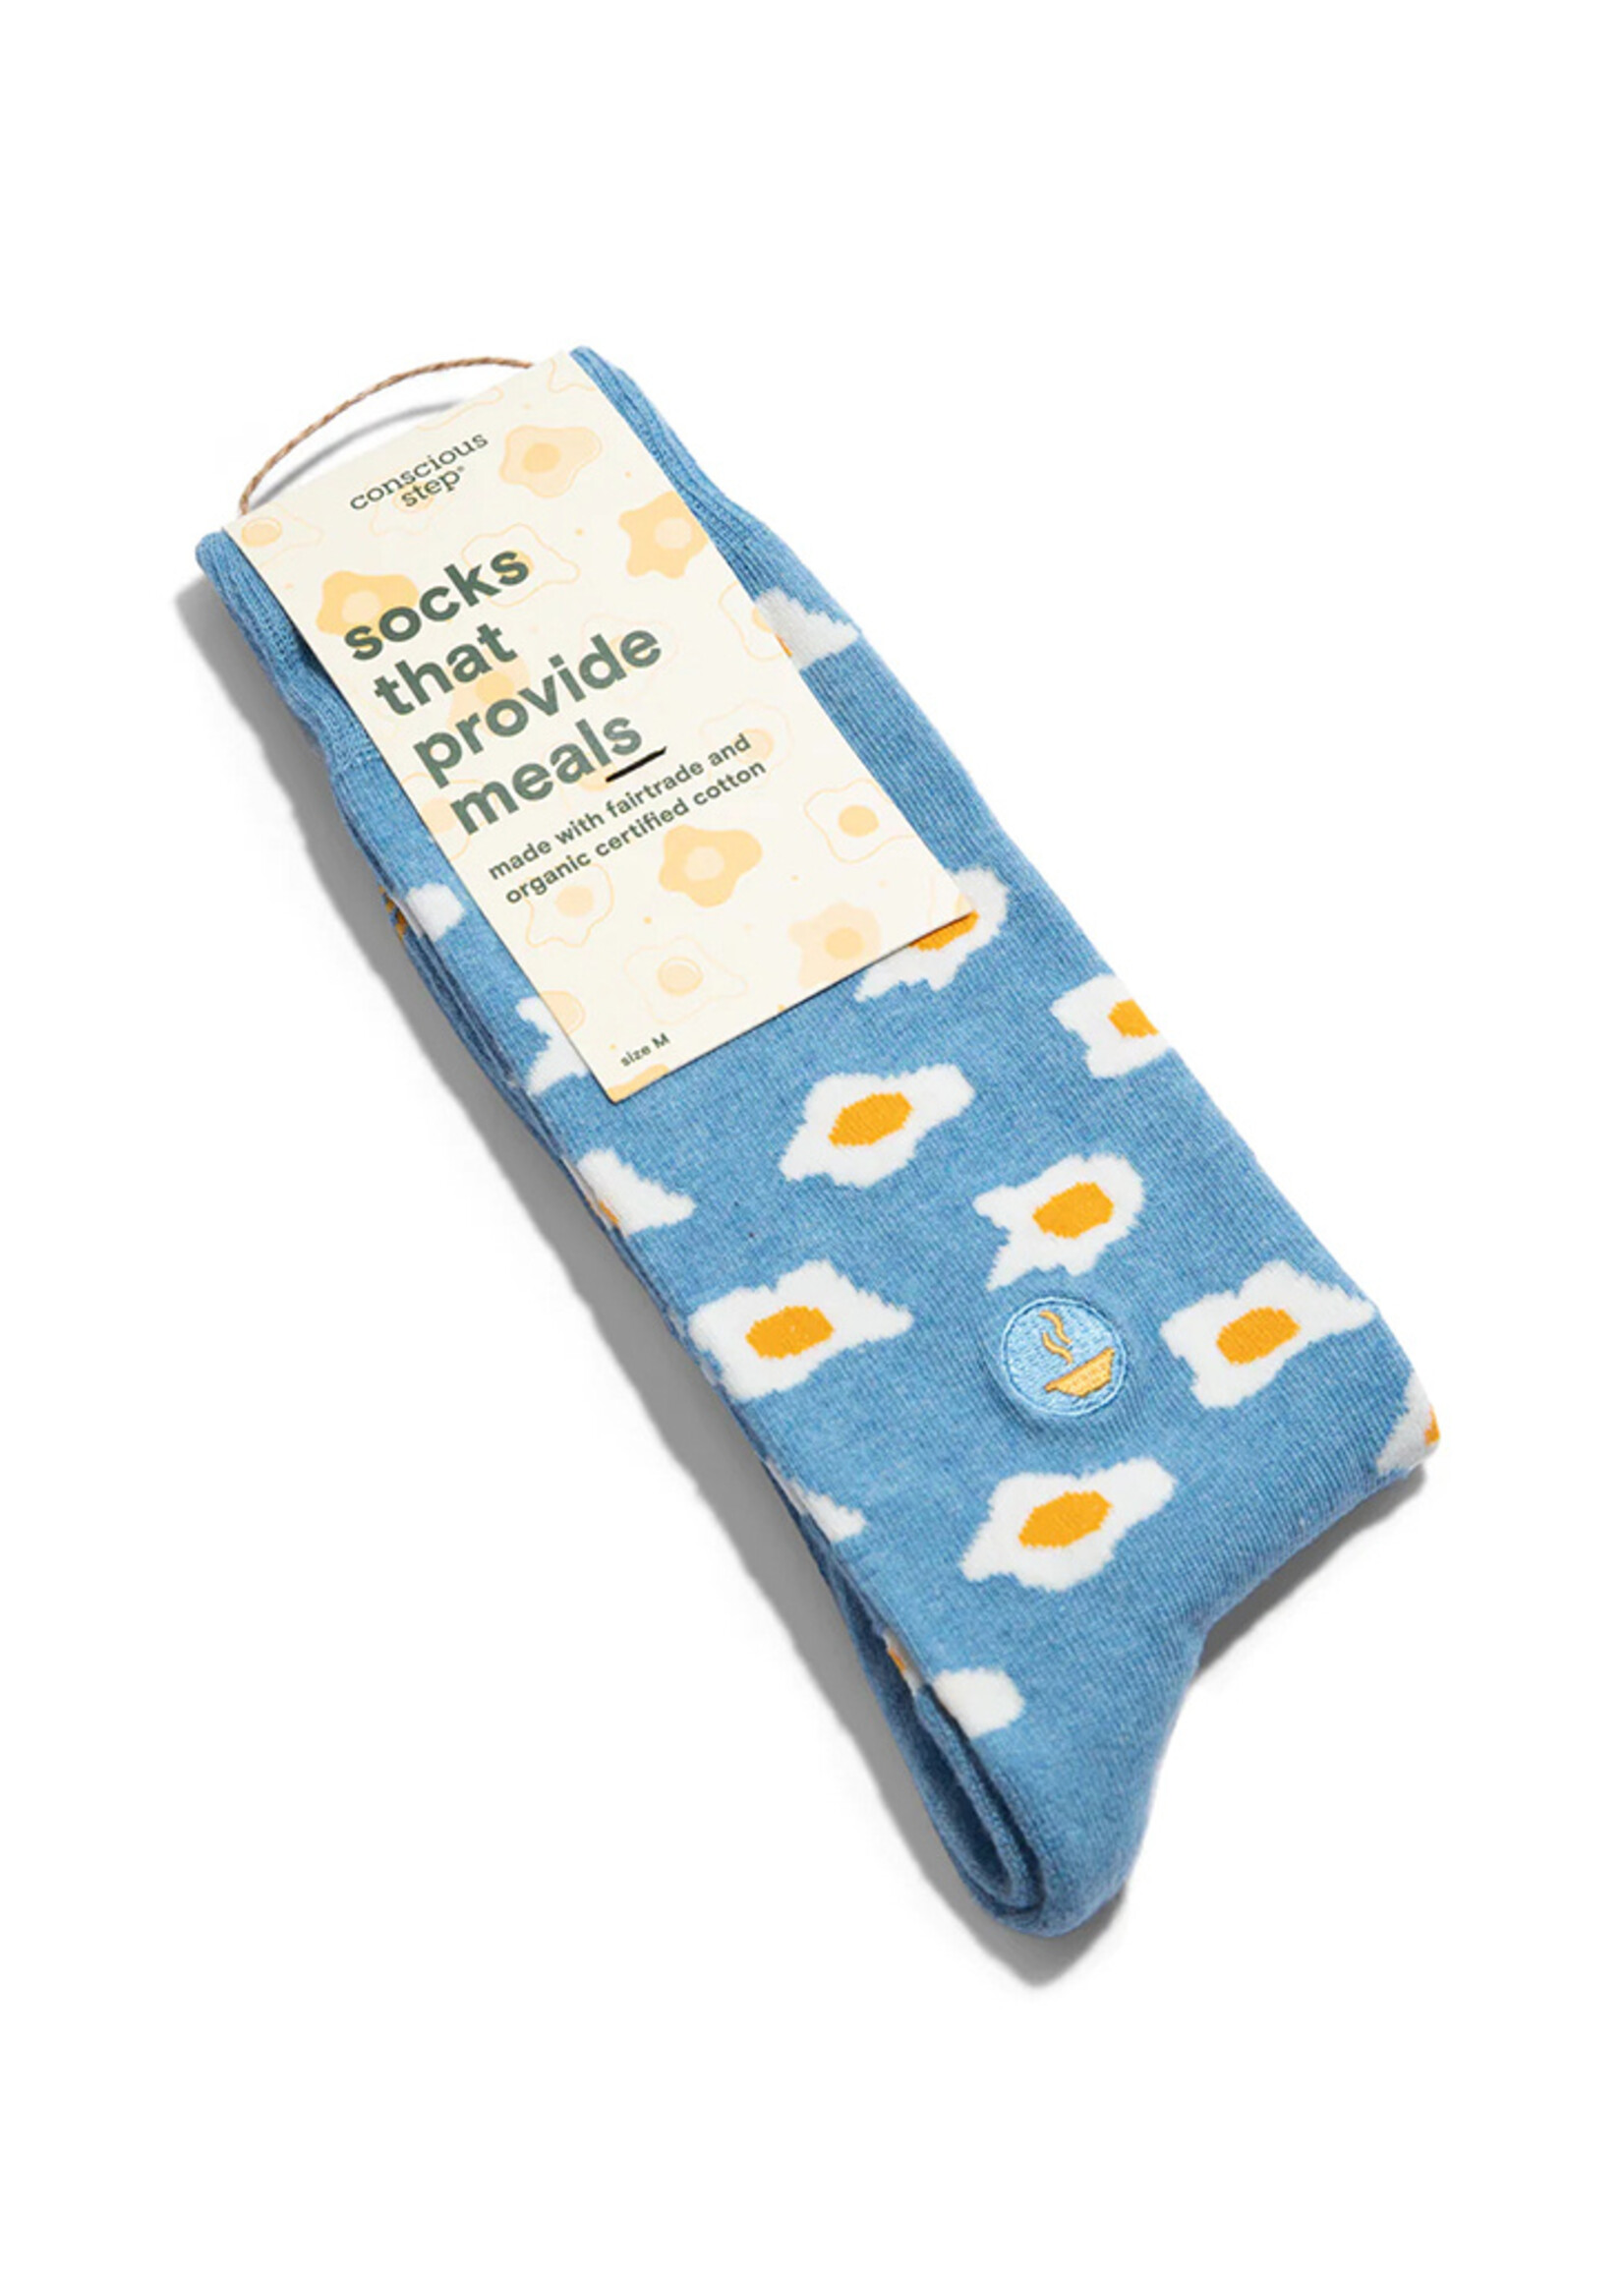 Conscious Step Women's Egg Socks that Provide Meals